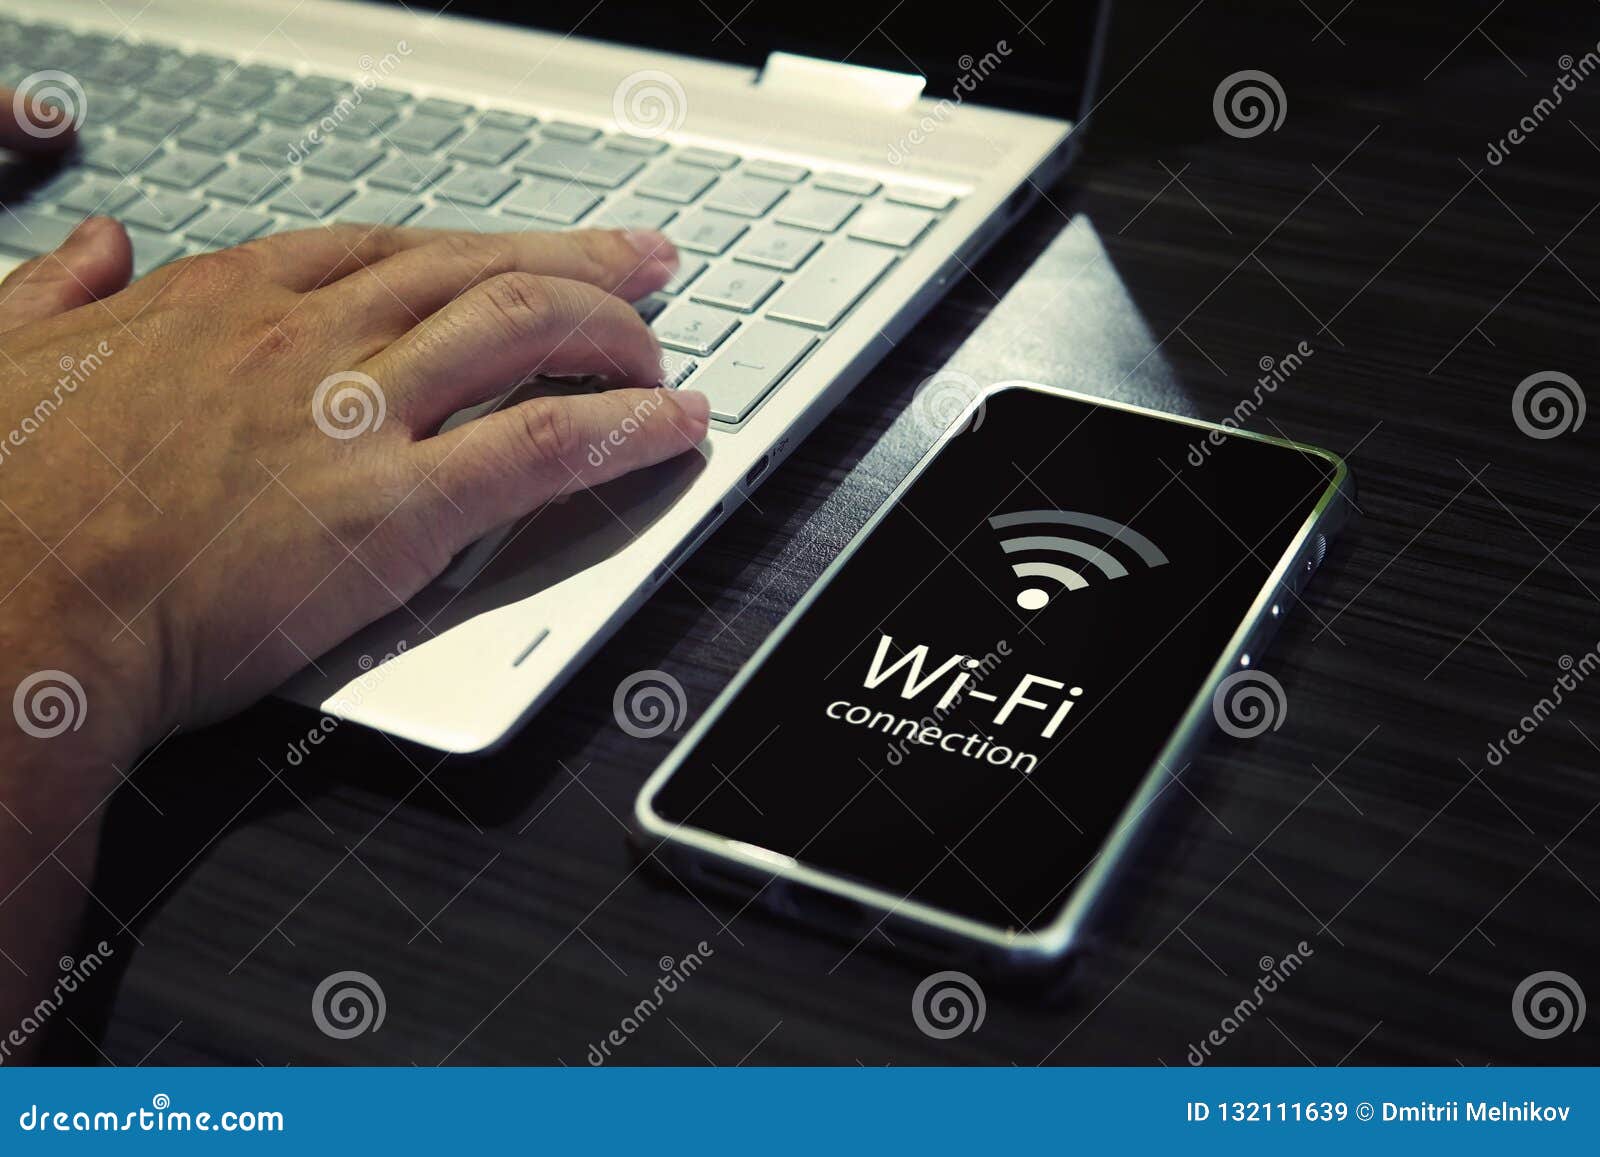 close up of male hands typing on laptop keypad and checking the smartphone wi-fi connection. cellphone with signal icon